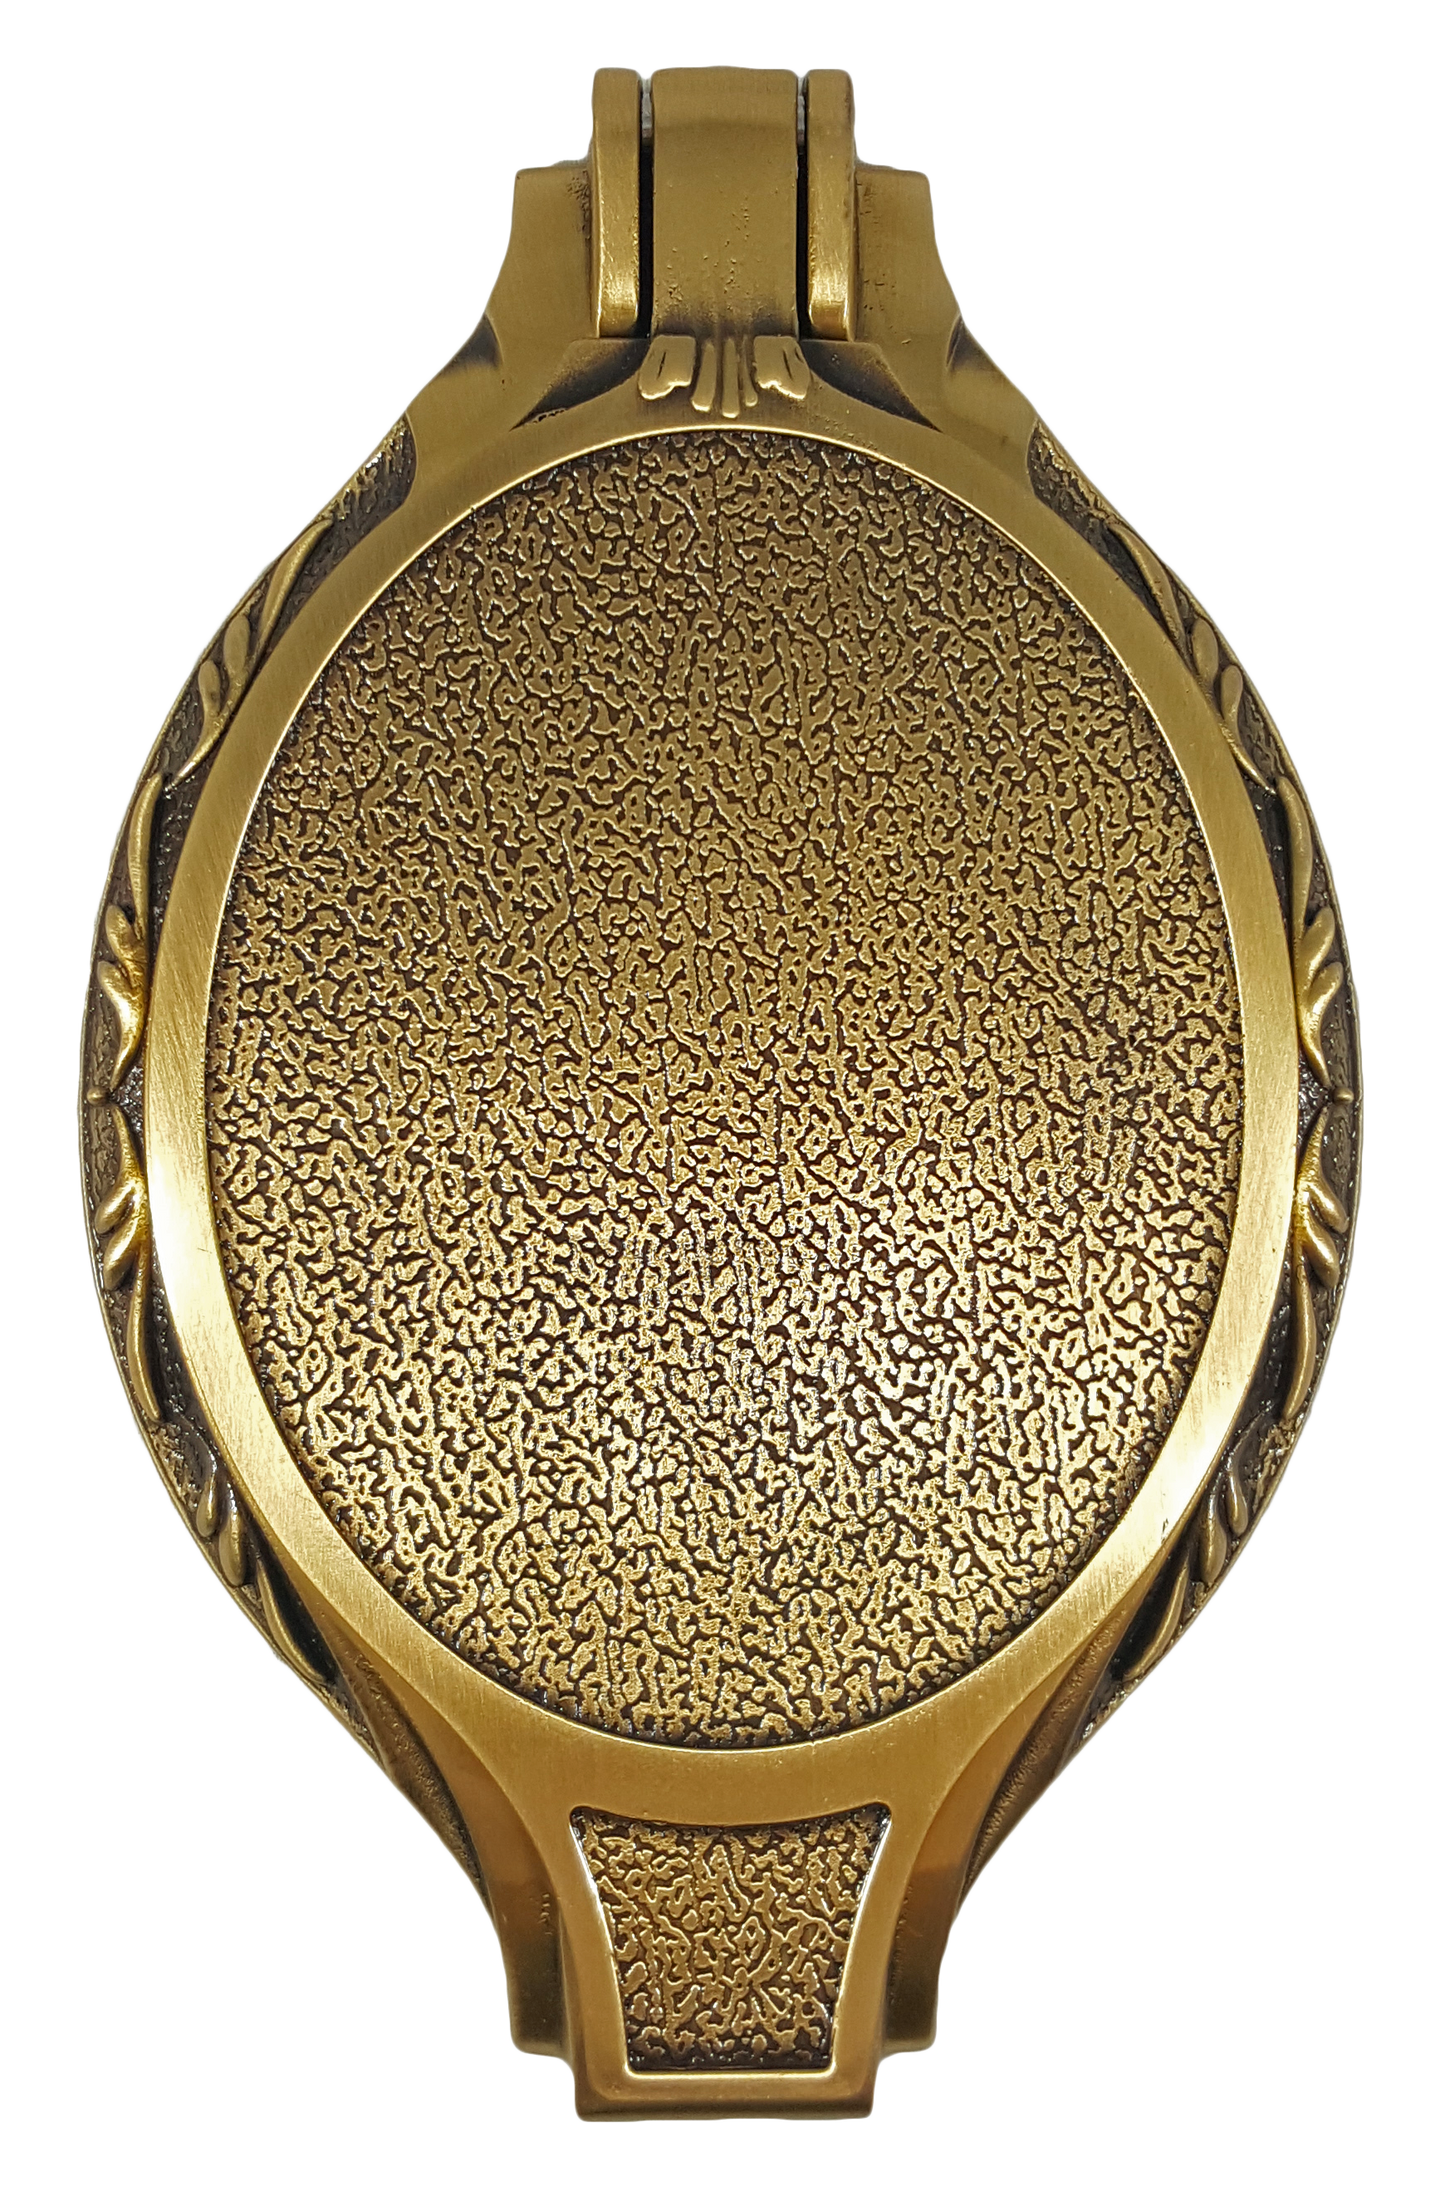 Oval Pictures for Headstones with Bronze Covers (3.9"x6.1")